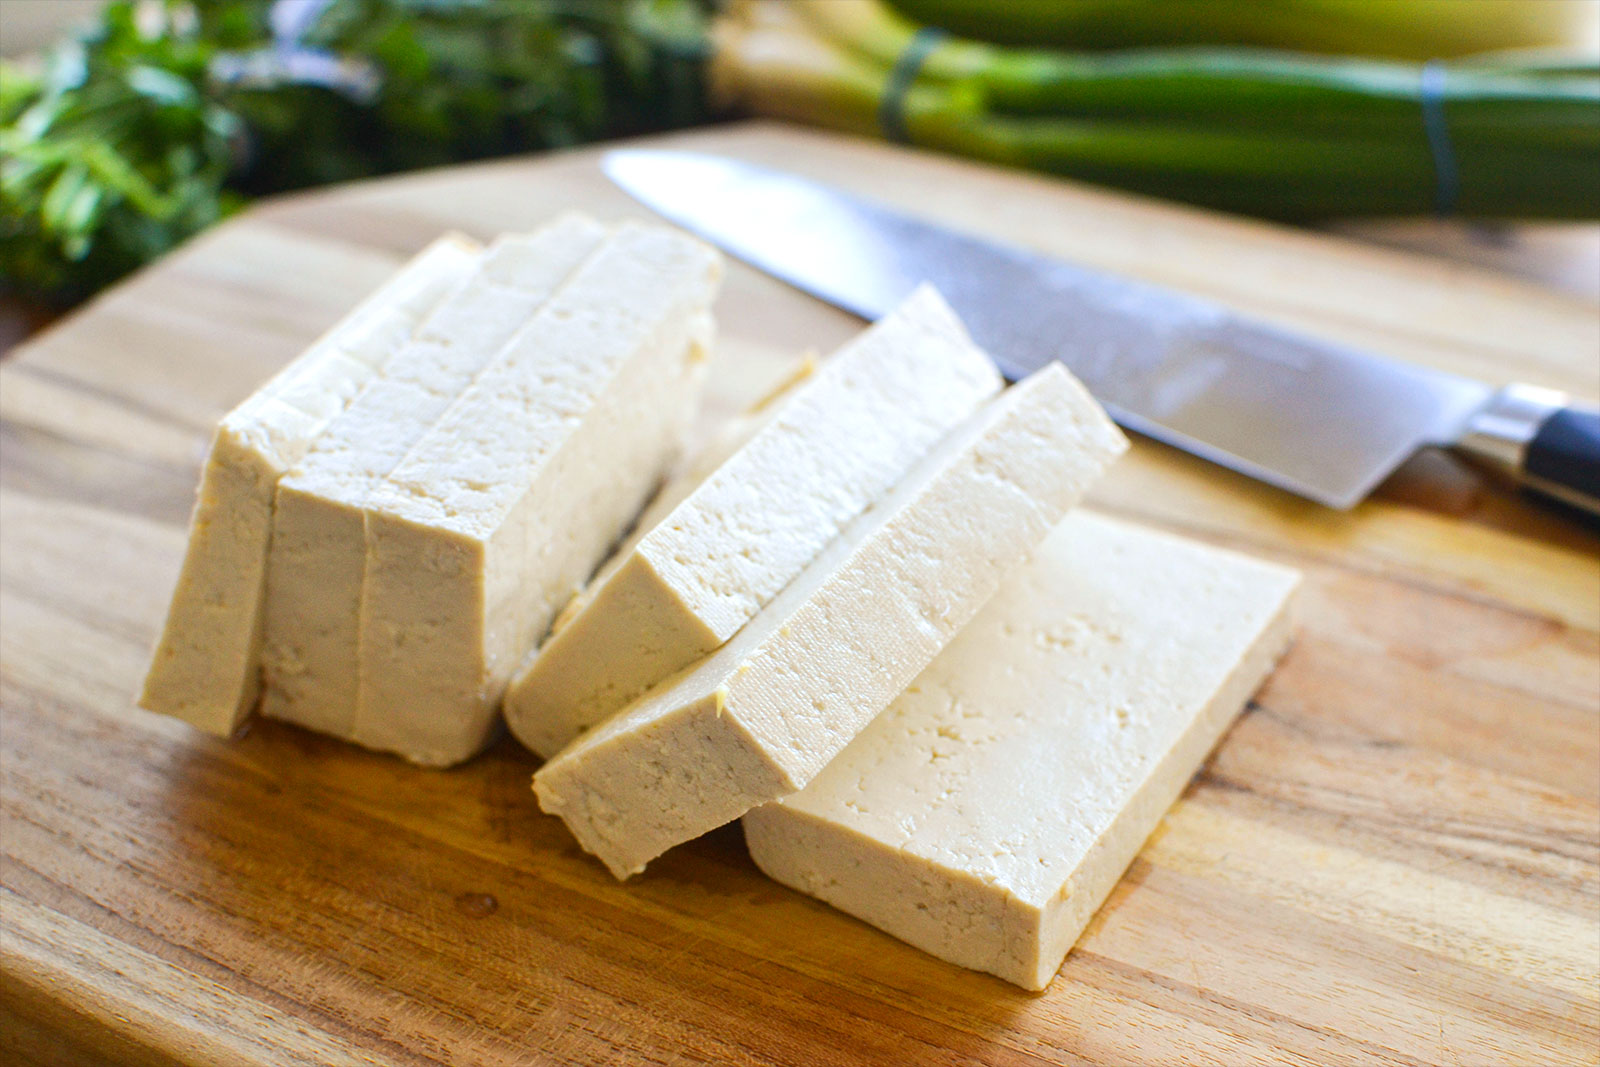 Say “Yuck” Or “Yum” to These Foods and We’ll Determine Your Exact Age Tofu